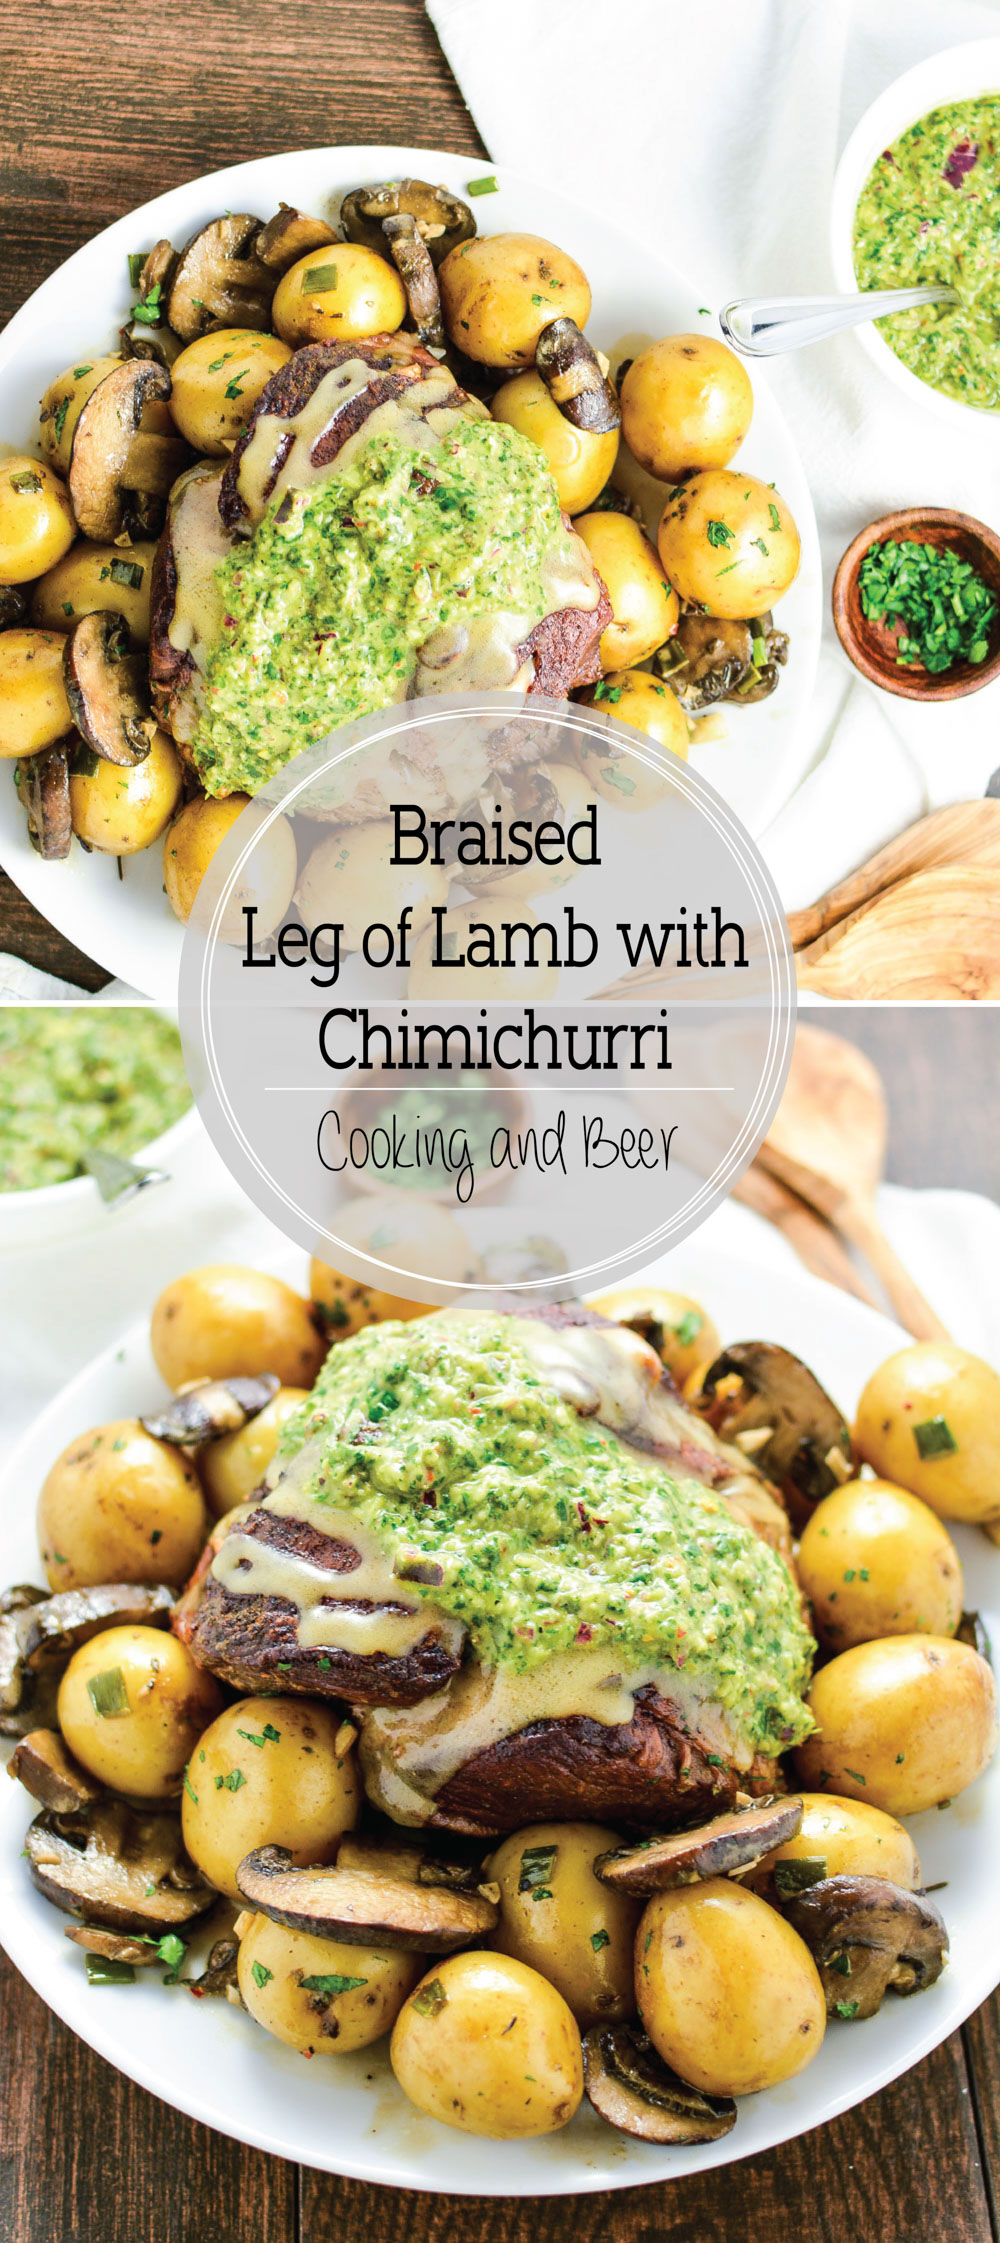 Braised Leg of Lamb with Chimichurri is a comforting and hearty dinner recipe!